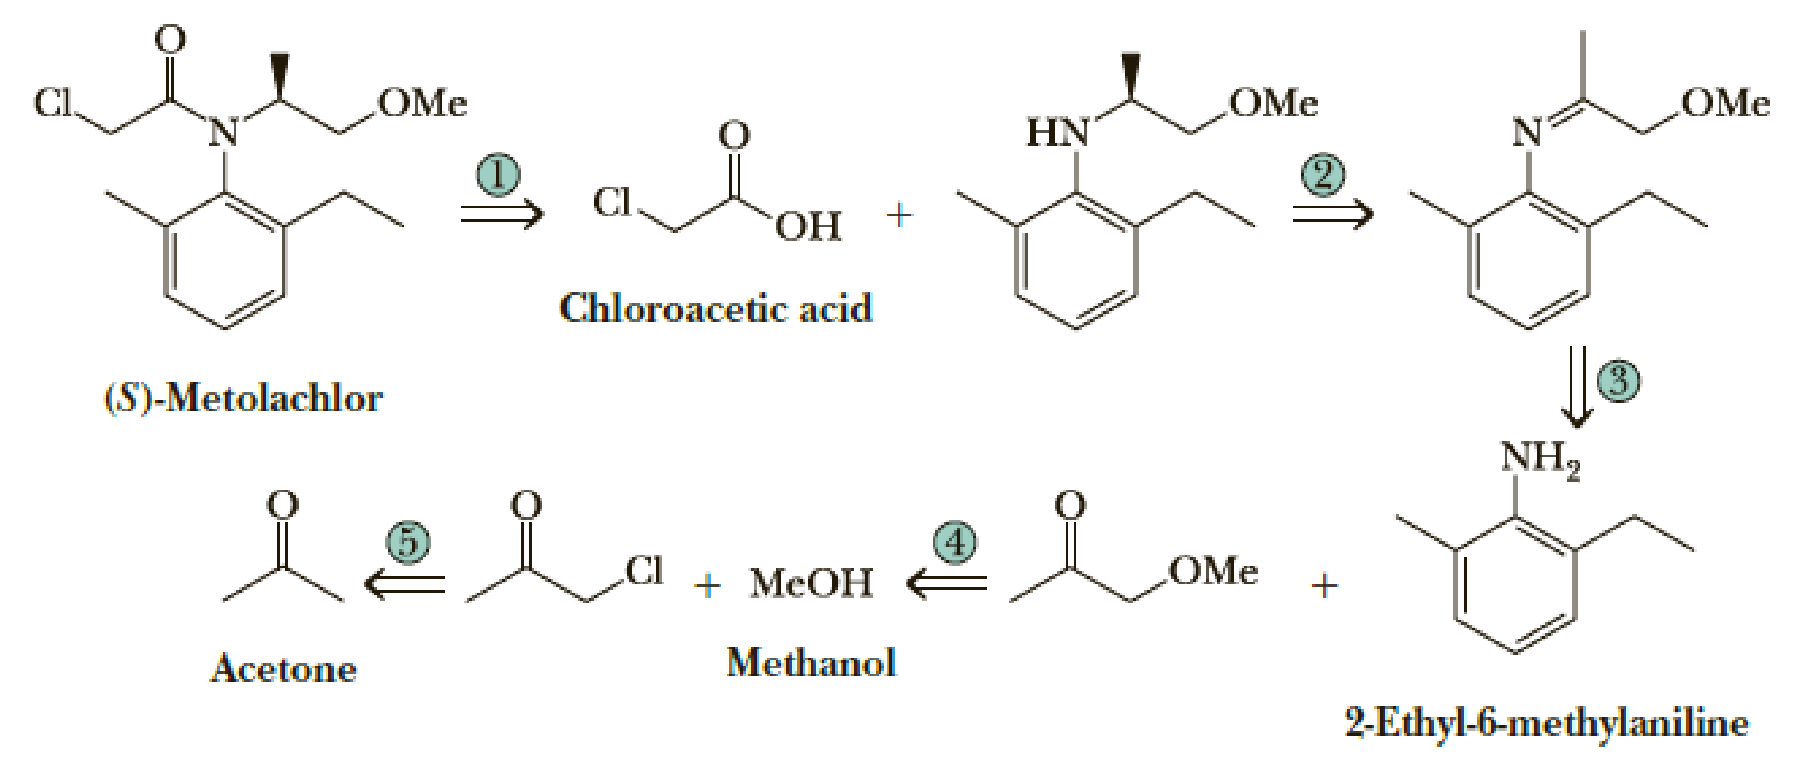 Chapter 18, Problem 18.49P, Following is a retrosynthetic analysis for the synthesis of the herbicide (S)-Metolachlor from 